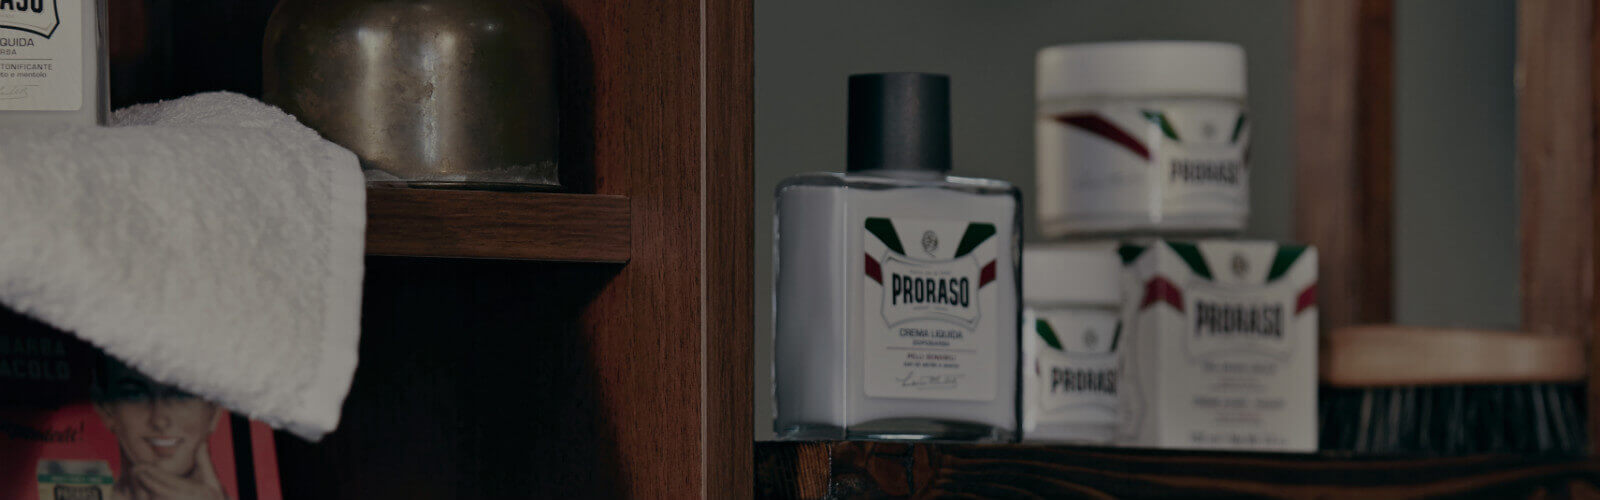 Proraso Shaving Products